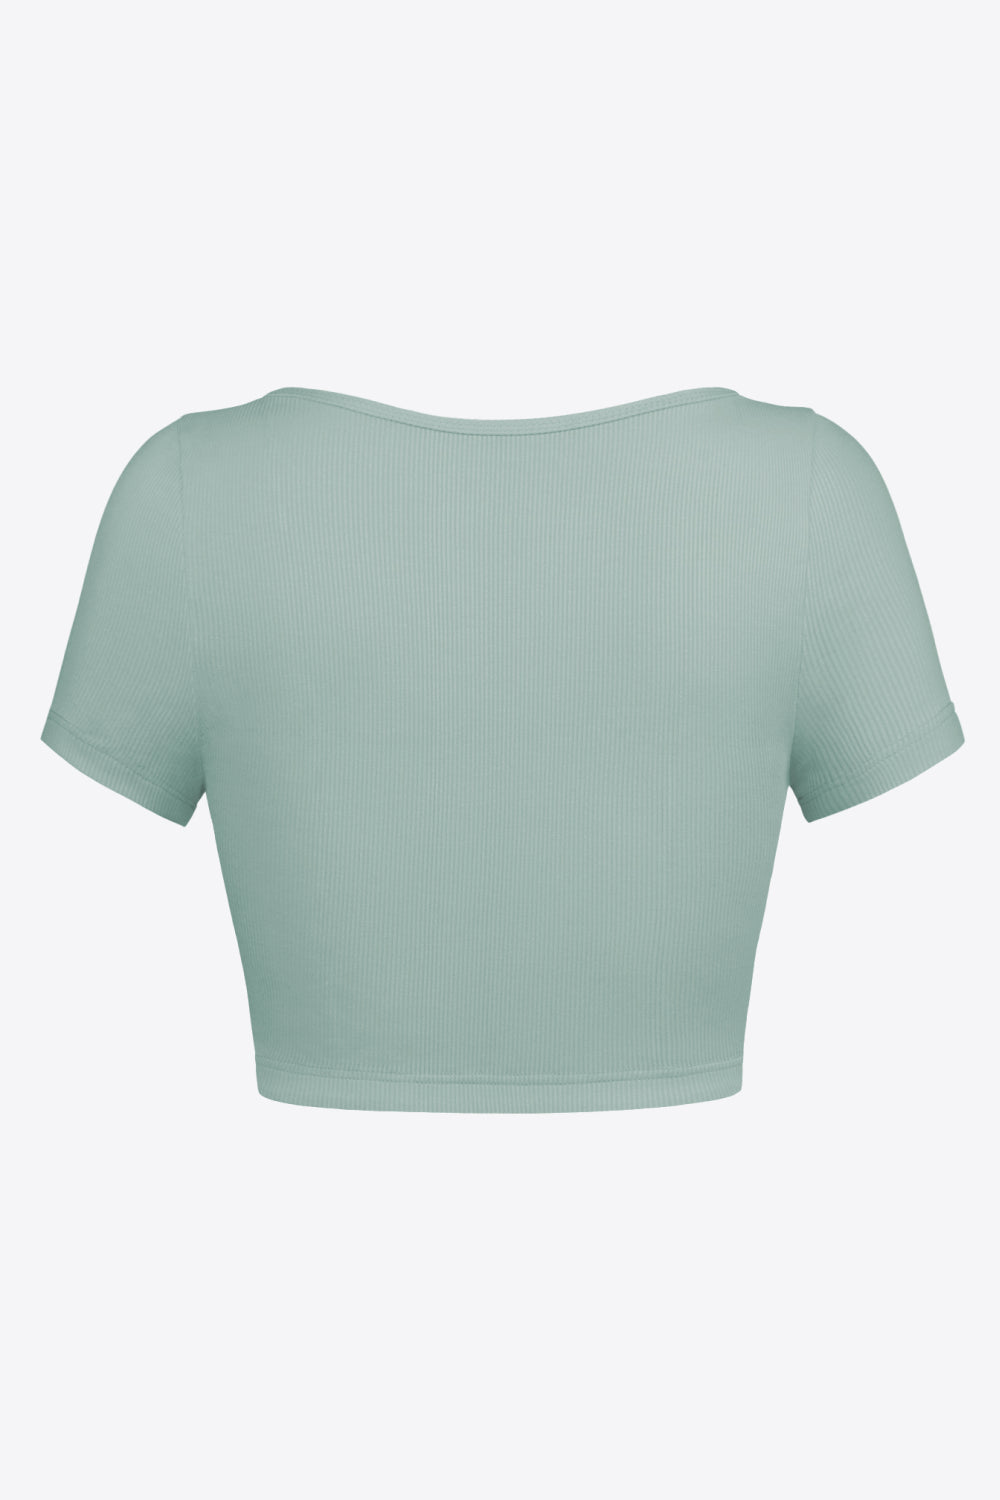 Square Neck Ribbed Crop Top - Women’s Clothing & Accessories - Shirts & Tops - 6 - 2024